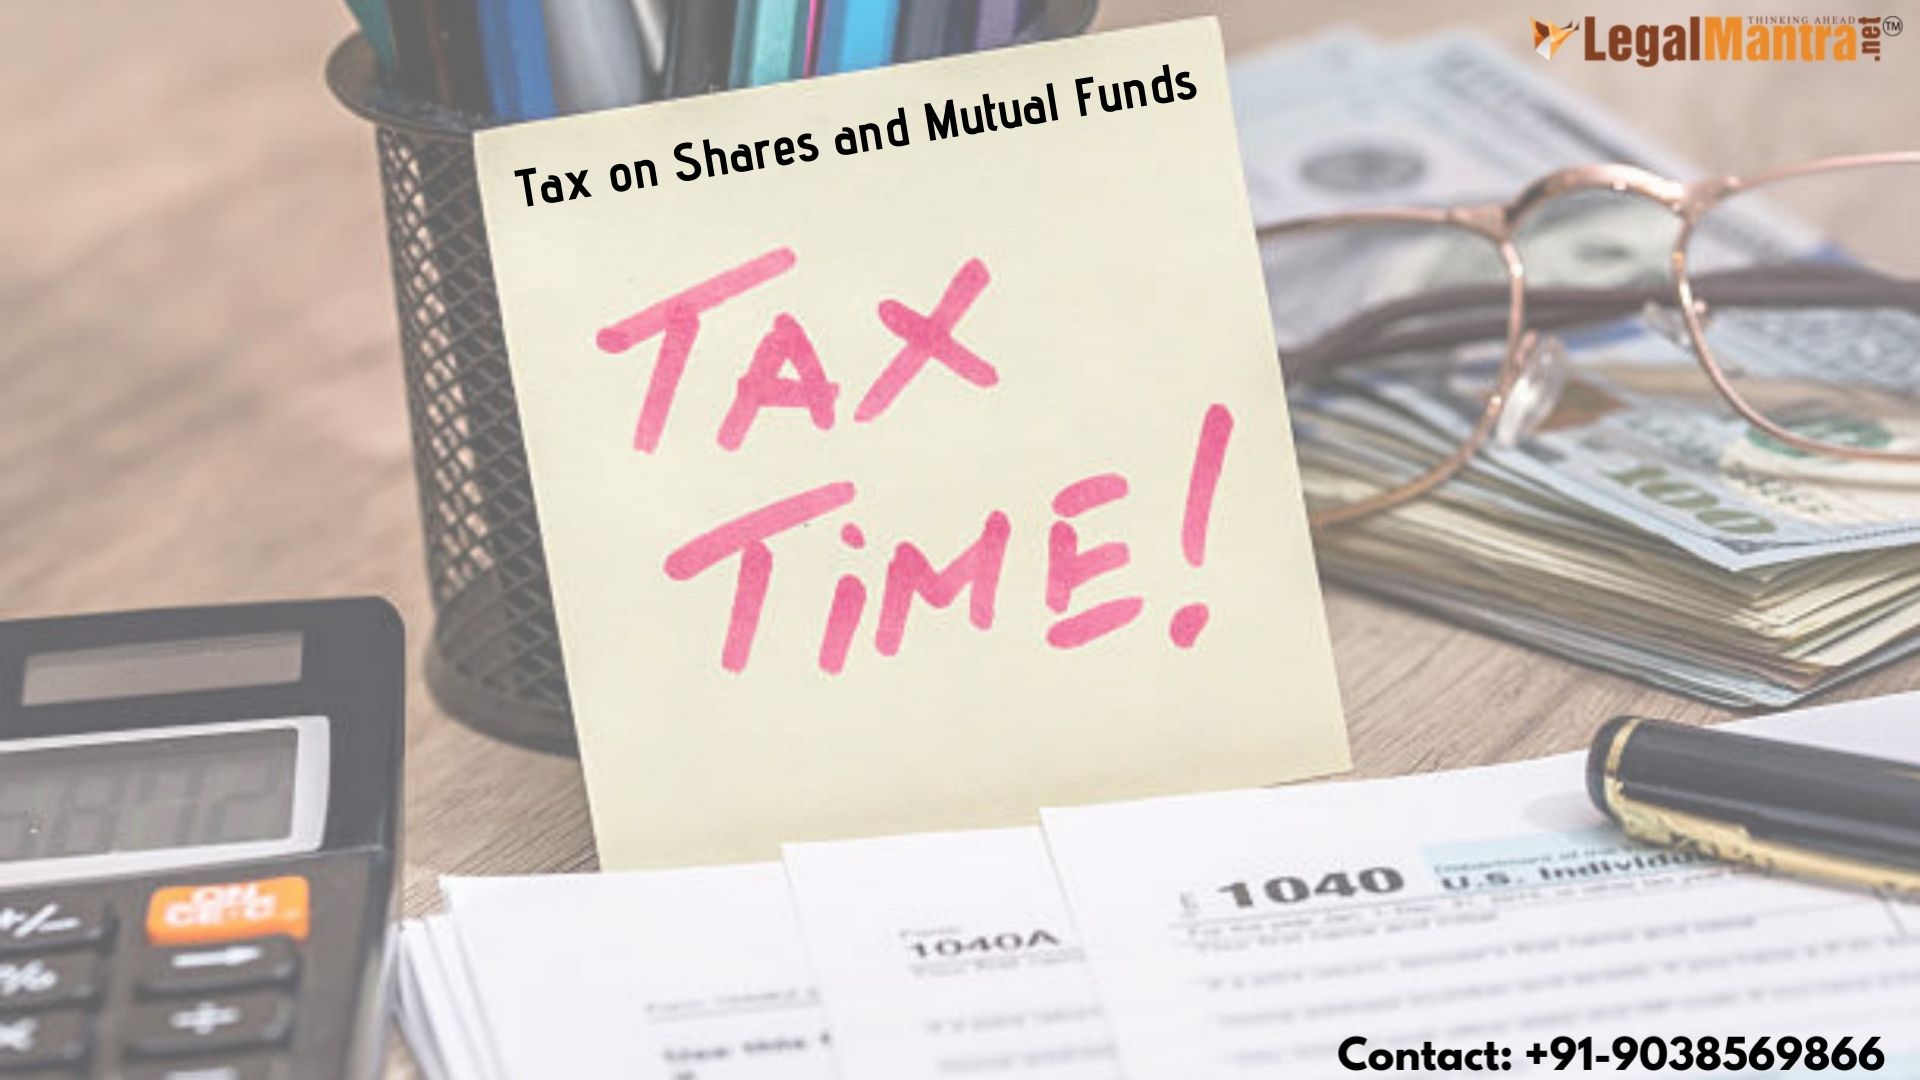 How to Easily Calculate Tax on Shares and Mutual Funds?